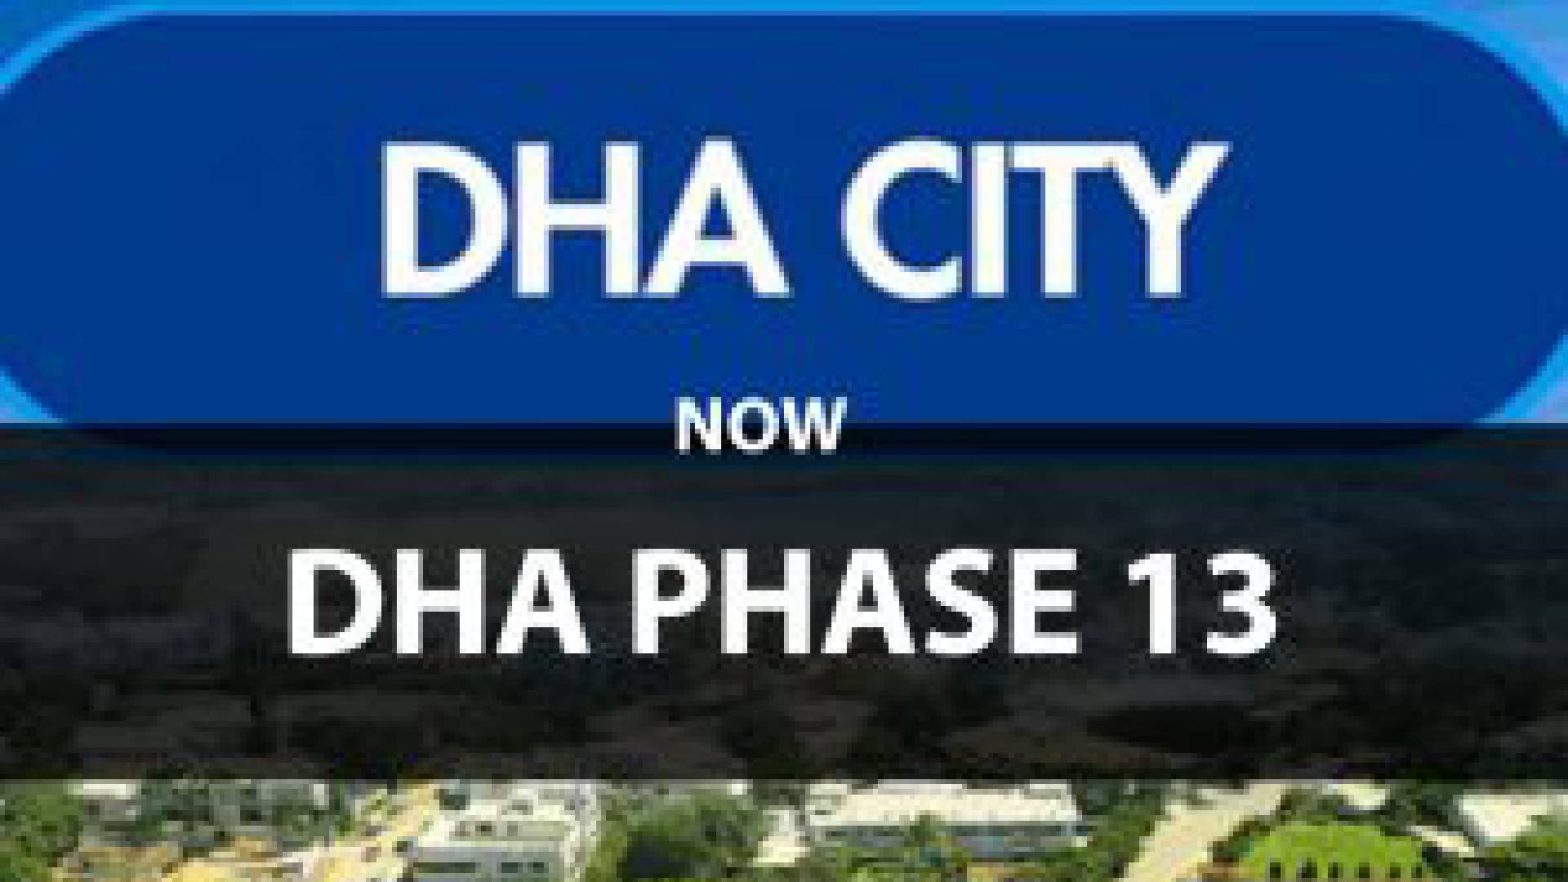 dha-city-now-dha-phase-13-lahore-pakistan